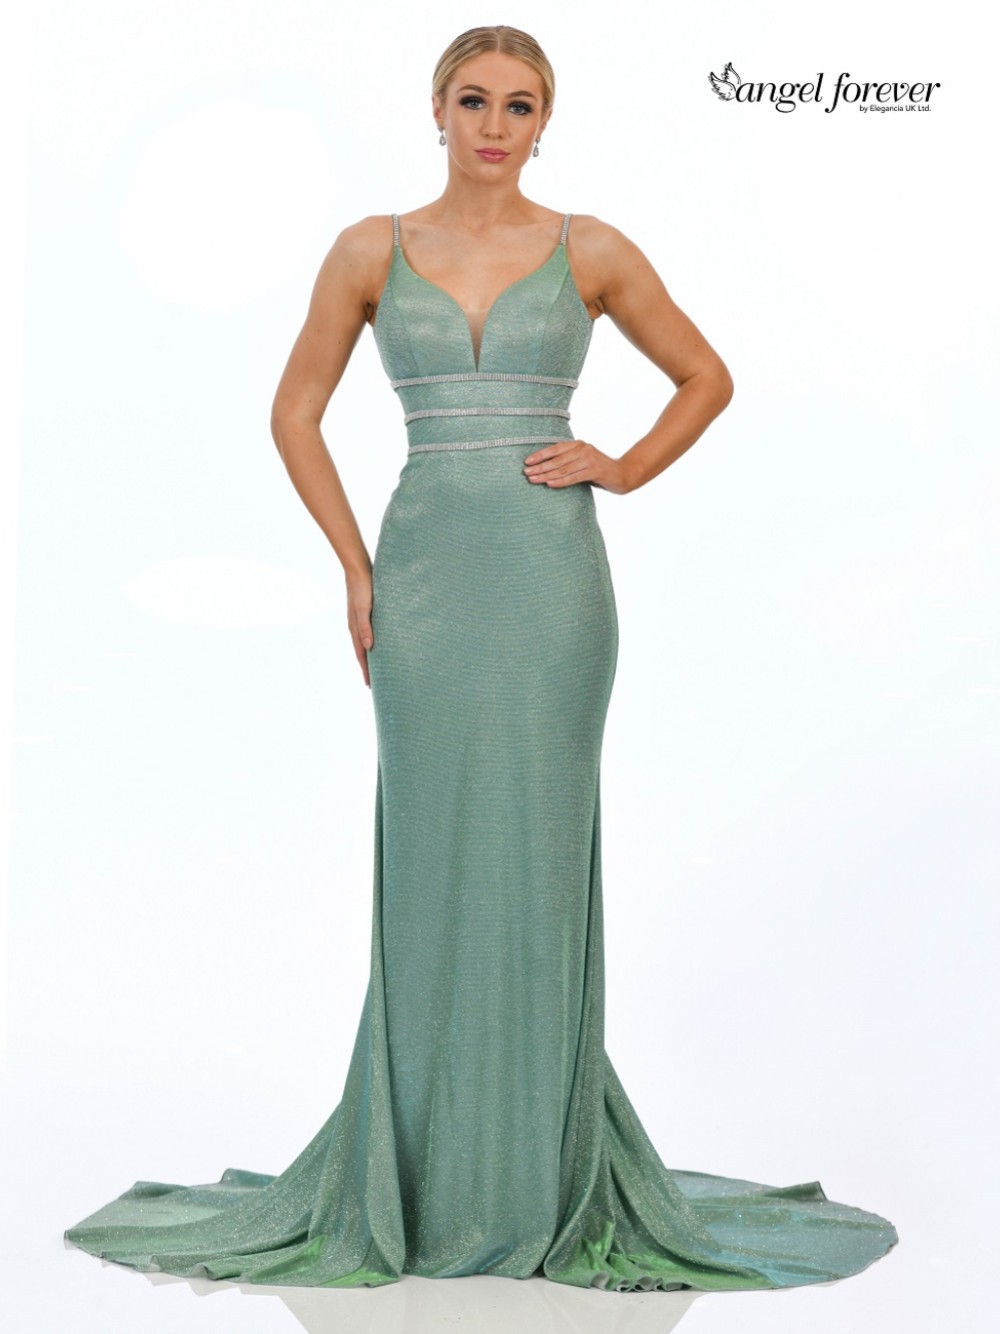 Photograph of Angel Forever Shimmer Fabric Fishtail Prom Dress with Diamante Detail (Mint)